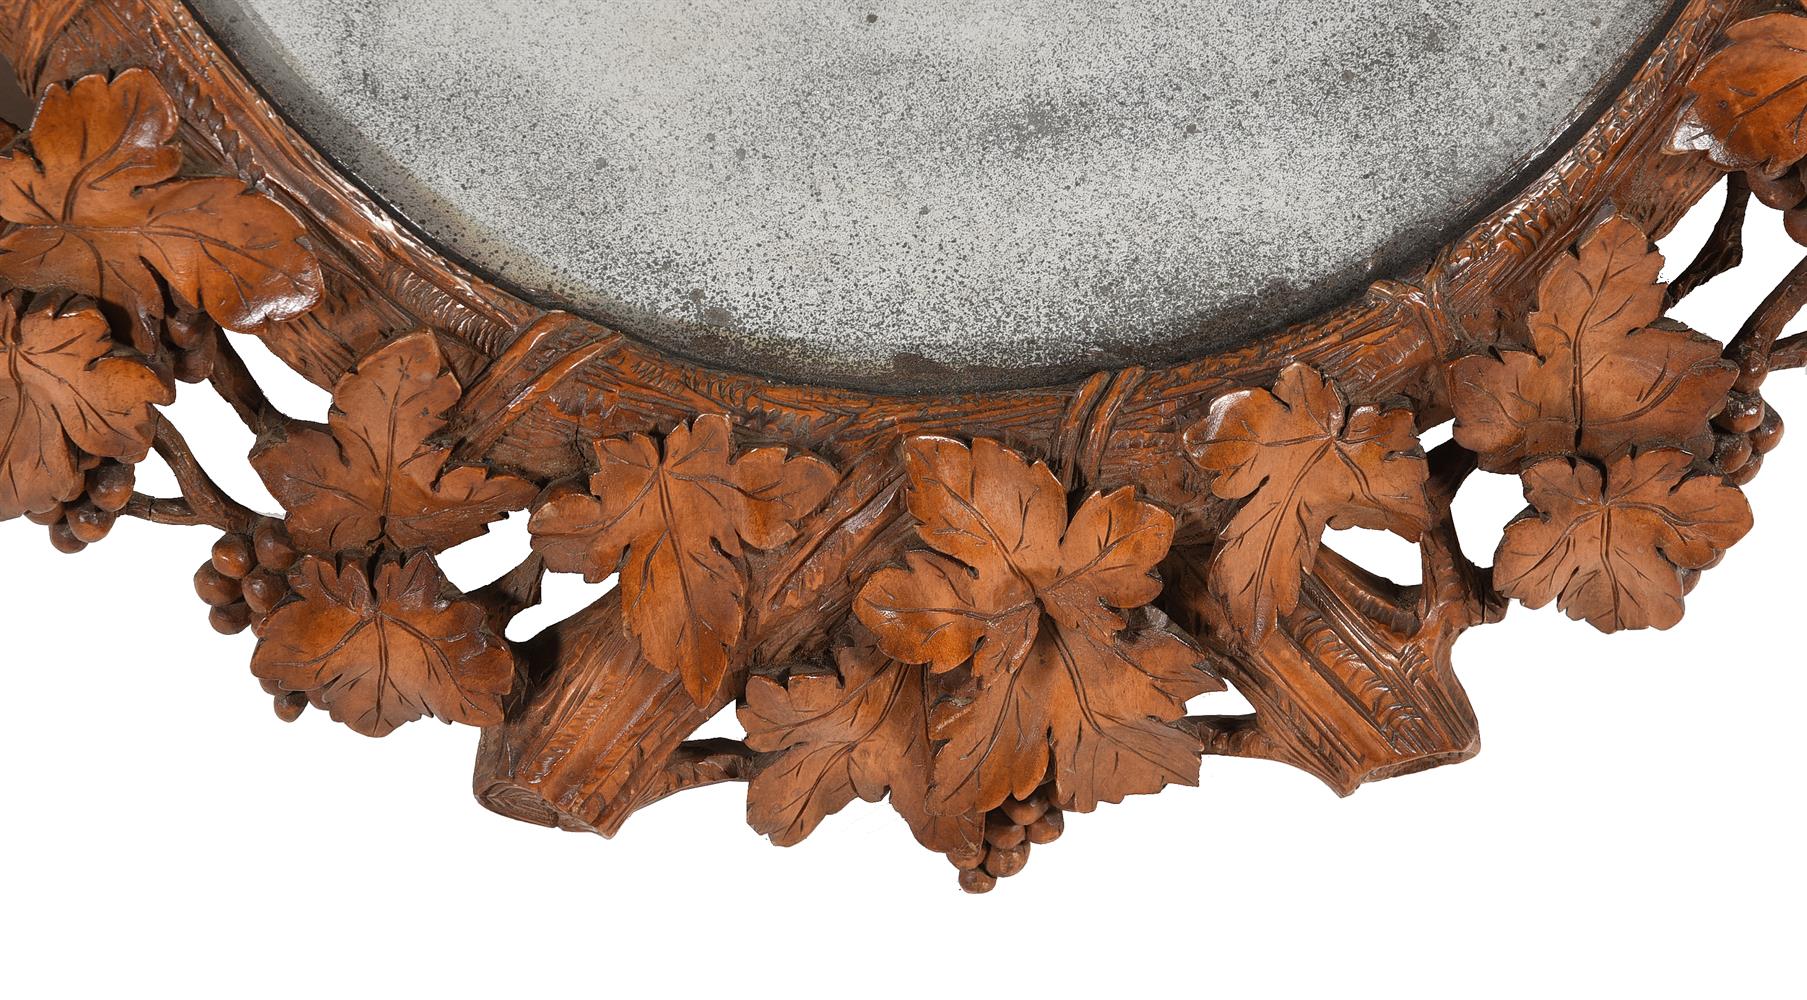 A GERMAN 'BLACK FOREST' CARVED SOFTWOOD OVAL MIRROR, LATE 19TH CENTURY - Image 2 of 5